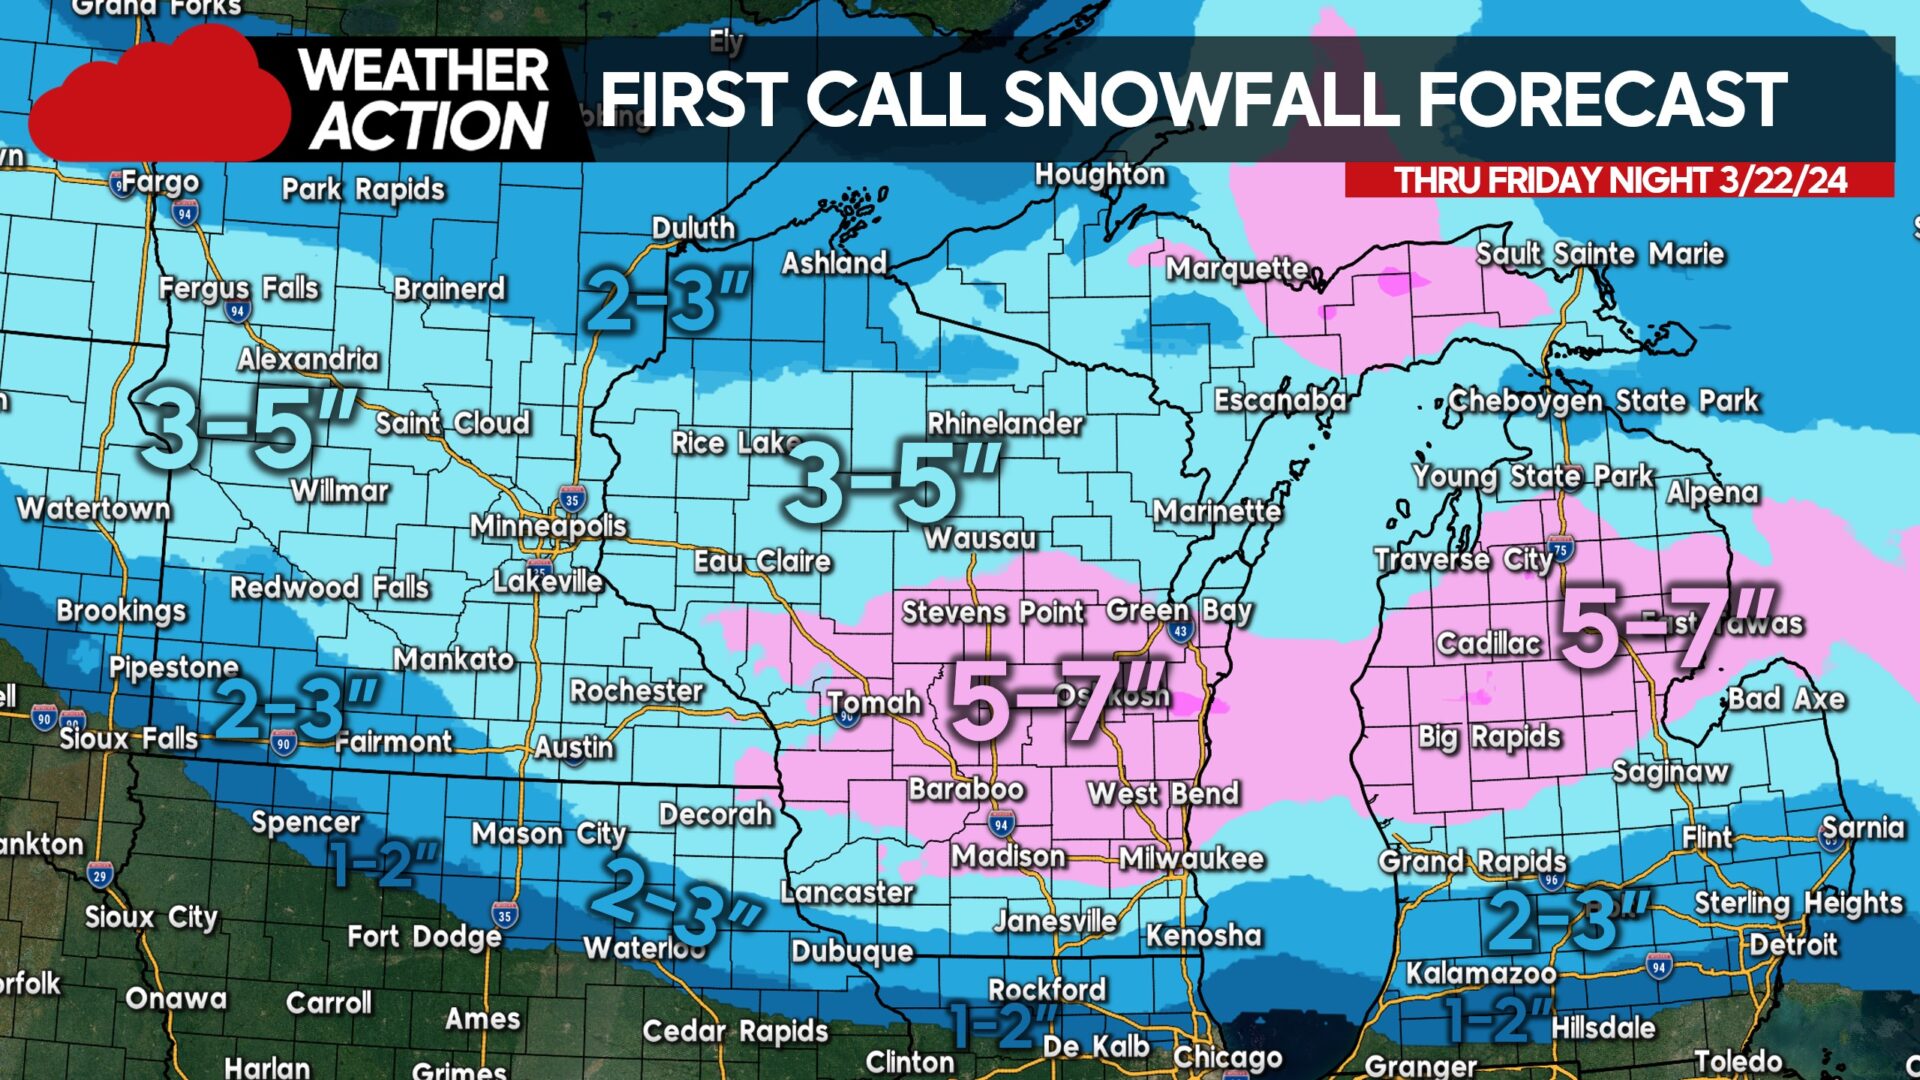 Snow Drought to End Across Upper Midwest As First of Two Snowstorms Sets Sight On Region